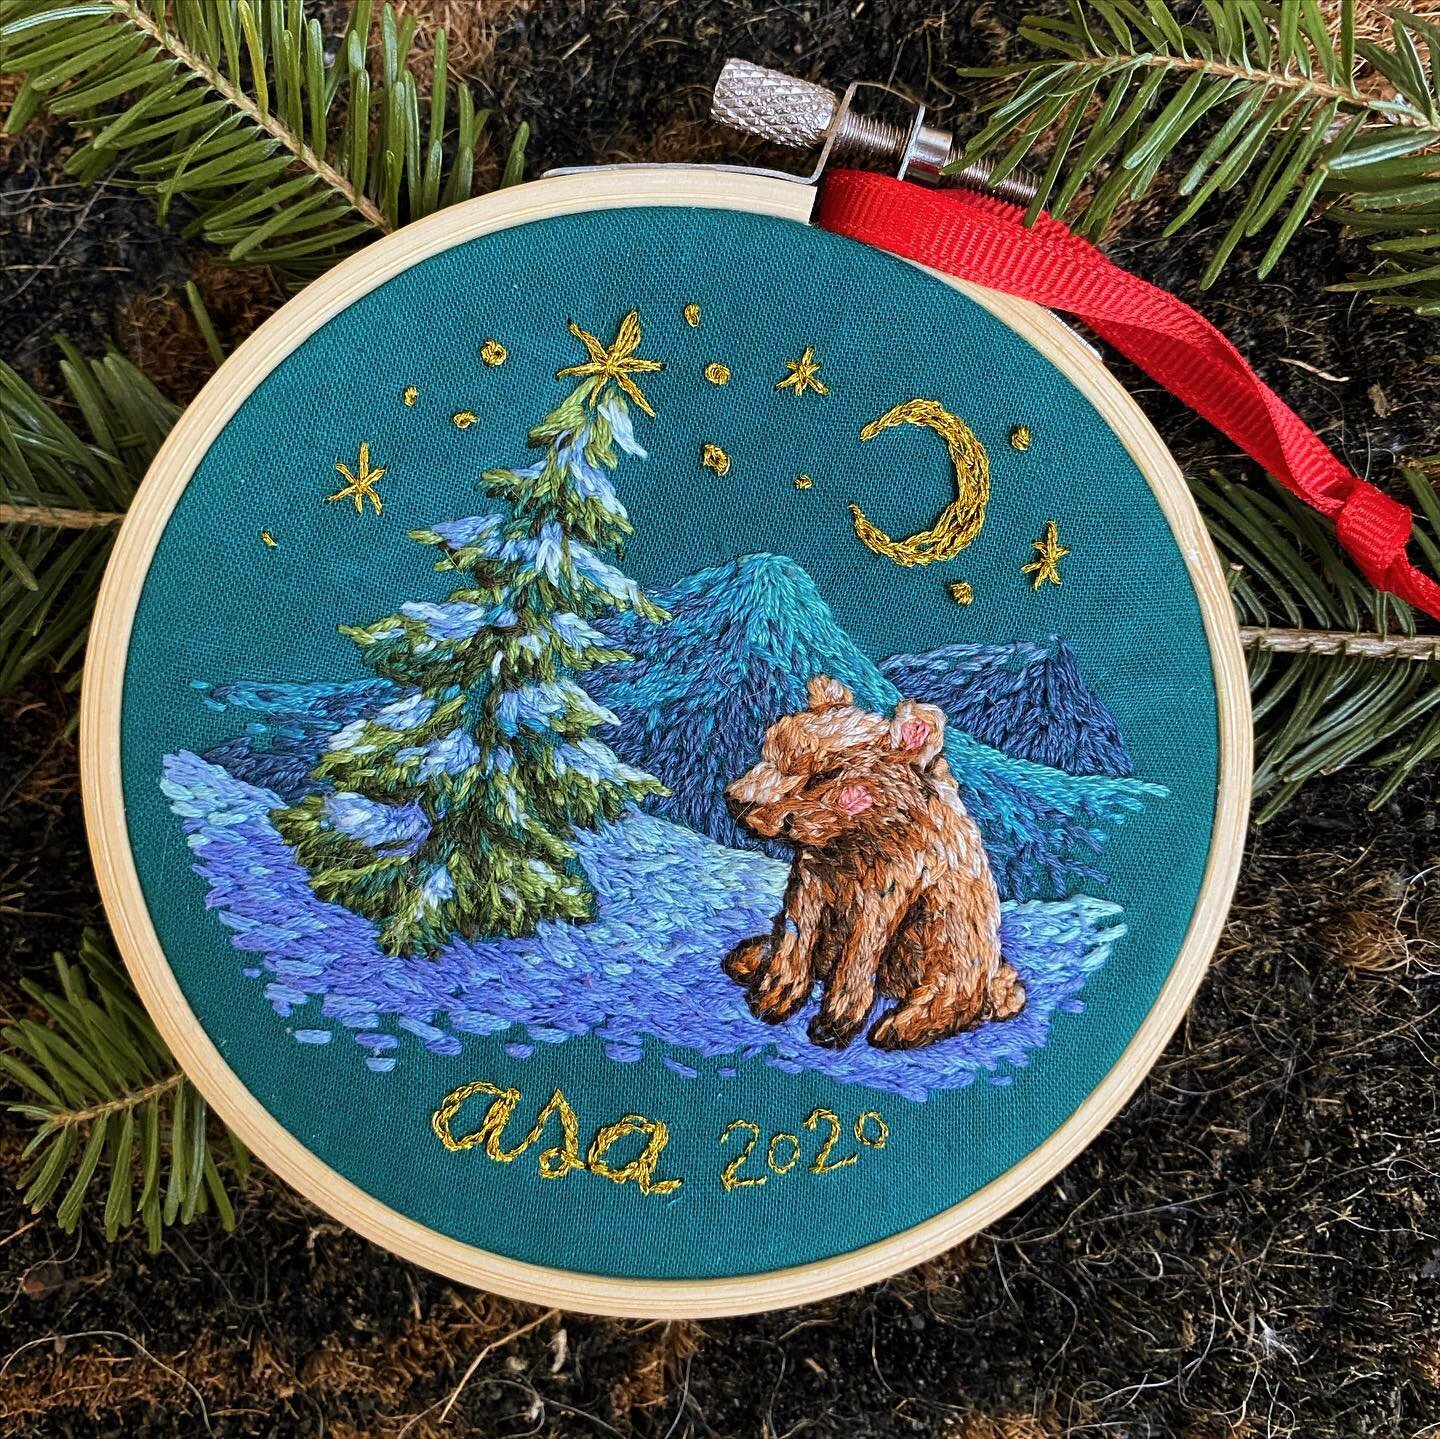 ✨A little bear for a little bear✨
It&rsquo;s been a LONG time since I&rsquo;ve embroidered anything. So thankful for this project that allowed me to jump back in &hearts;️